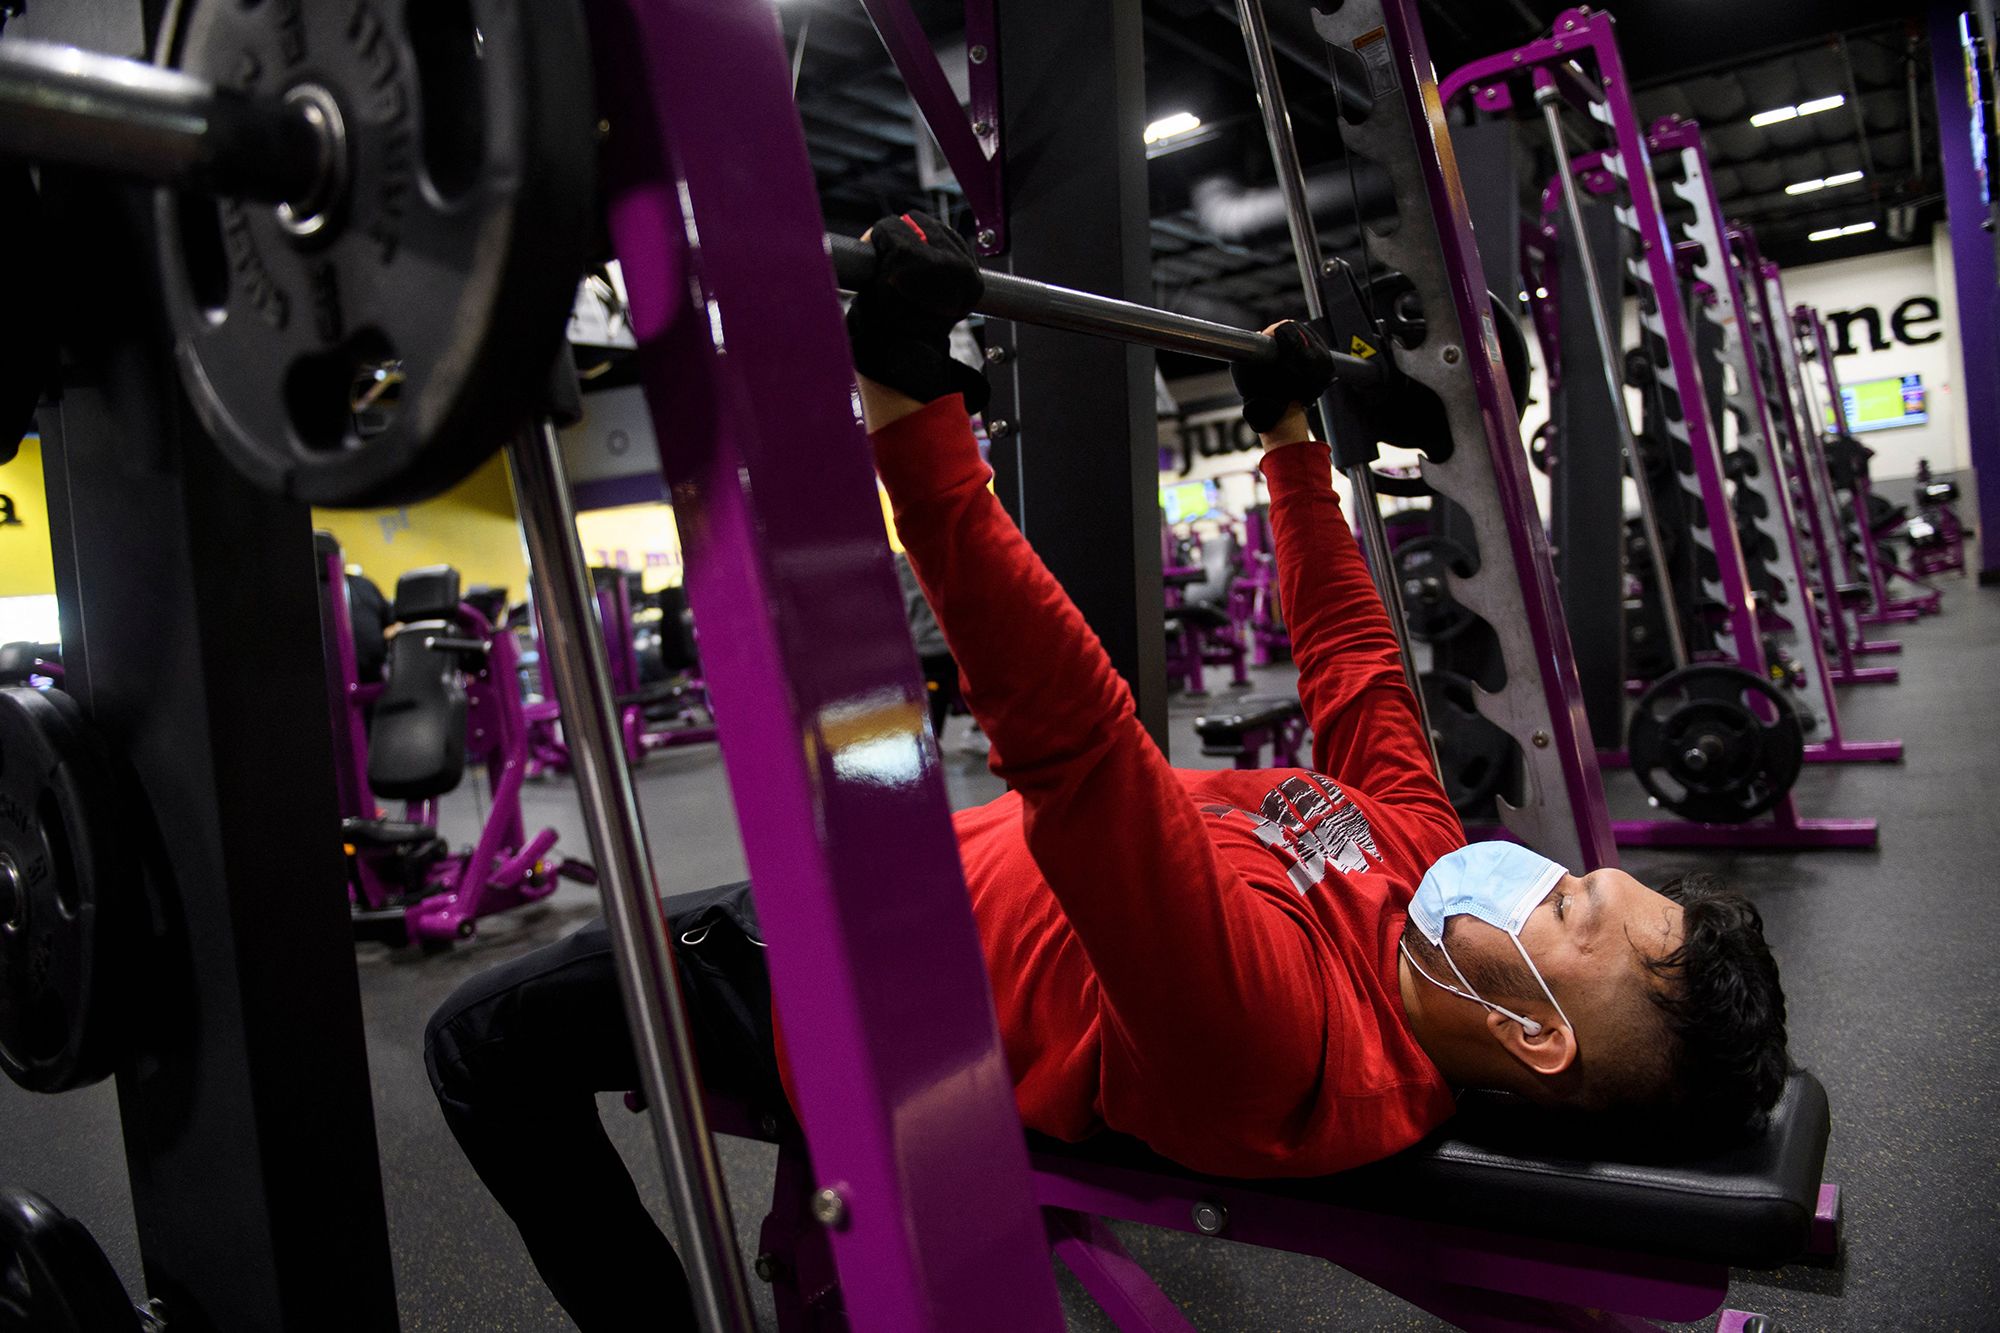 Planet Fitness CEO explains how it keeps gym memberships at $10